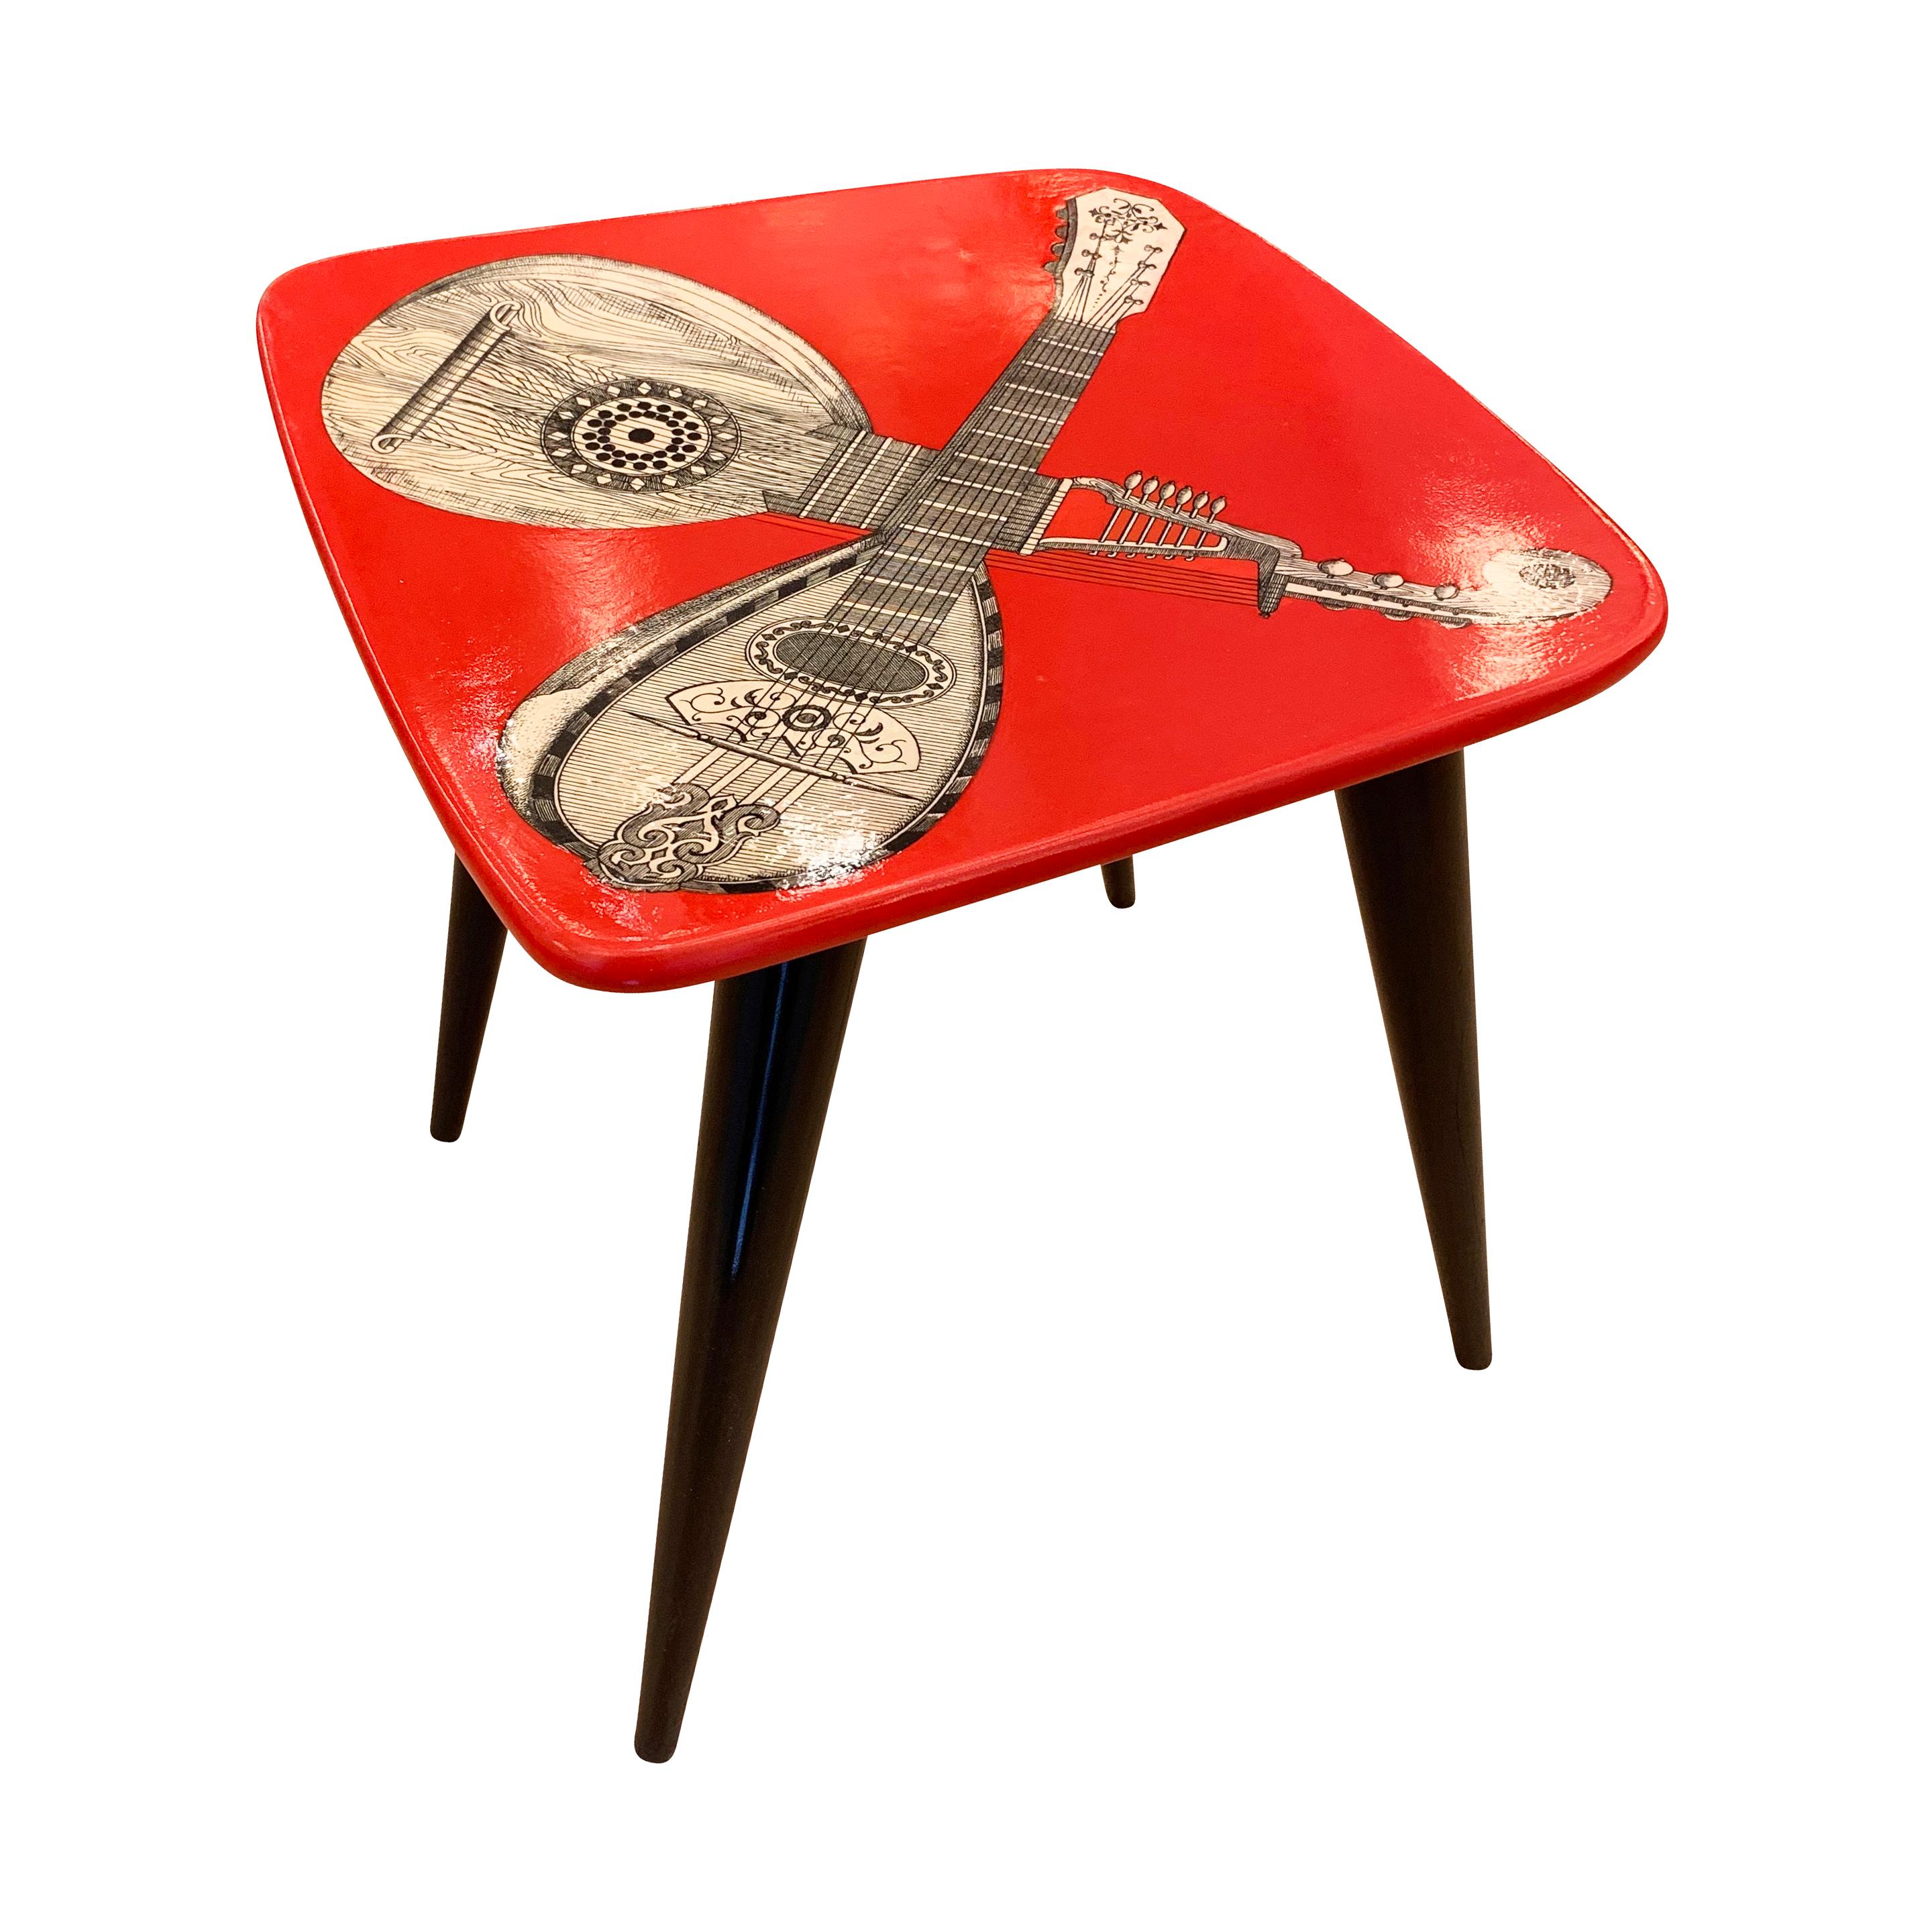 1950s Piero Fornasetti stool with a musical motif on a red background. Only about 60 were ever made and it was never re-edited adding to its rarity.

Condition: Excellent vintage condition, minor wear consistent with age and use.

Measures: